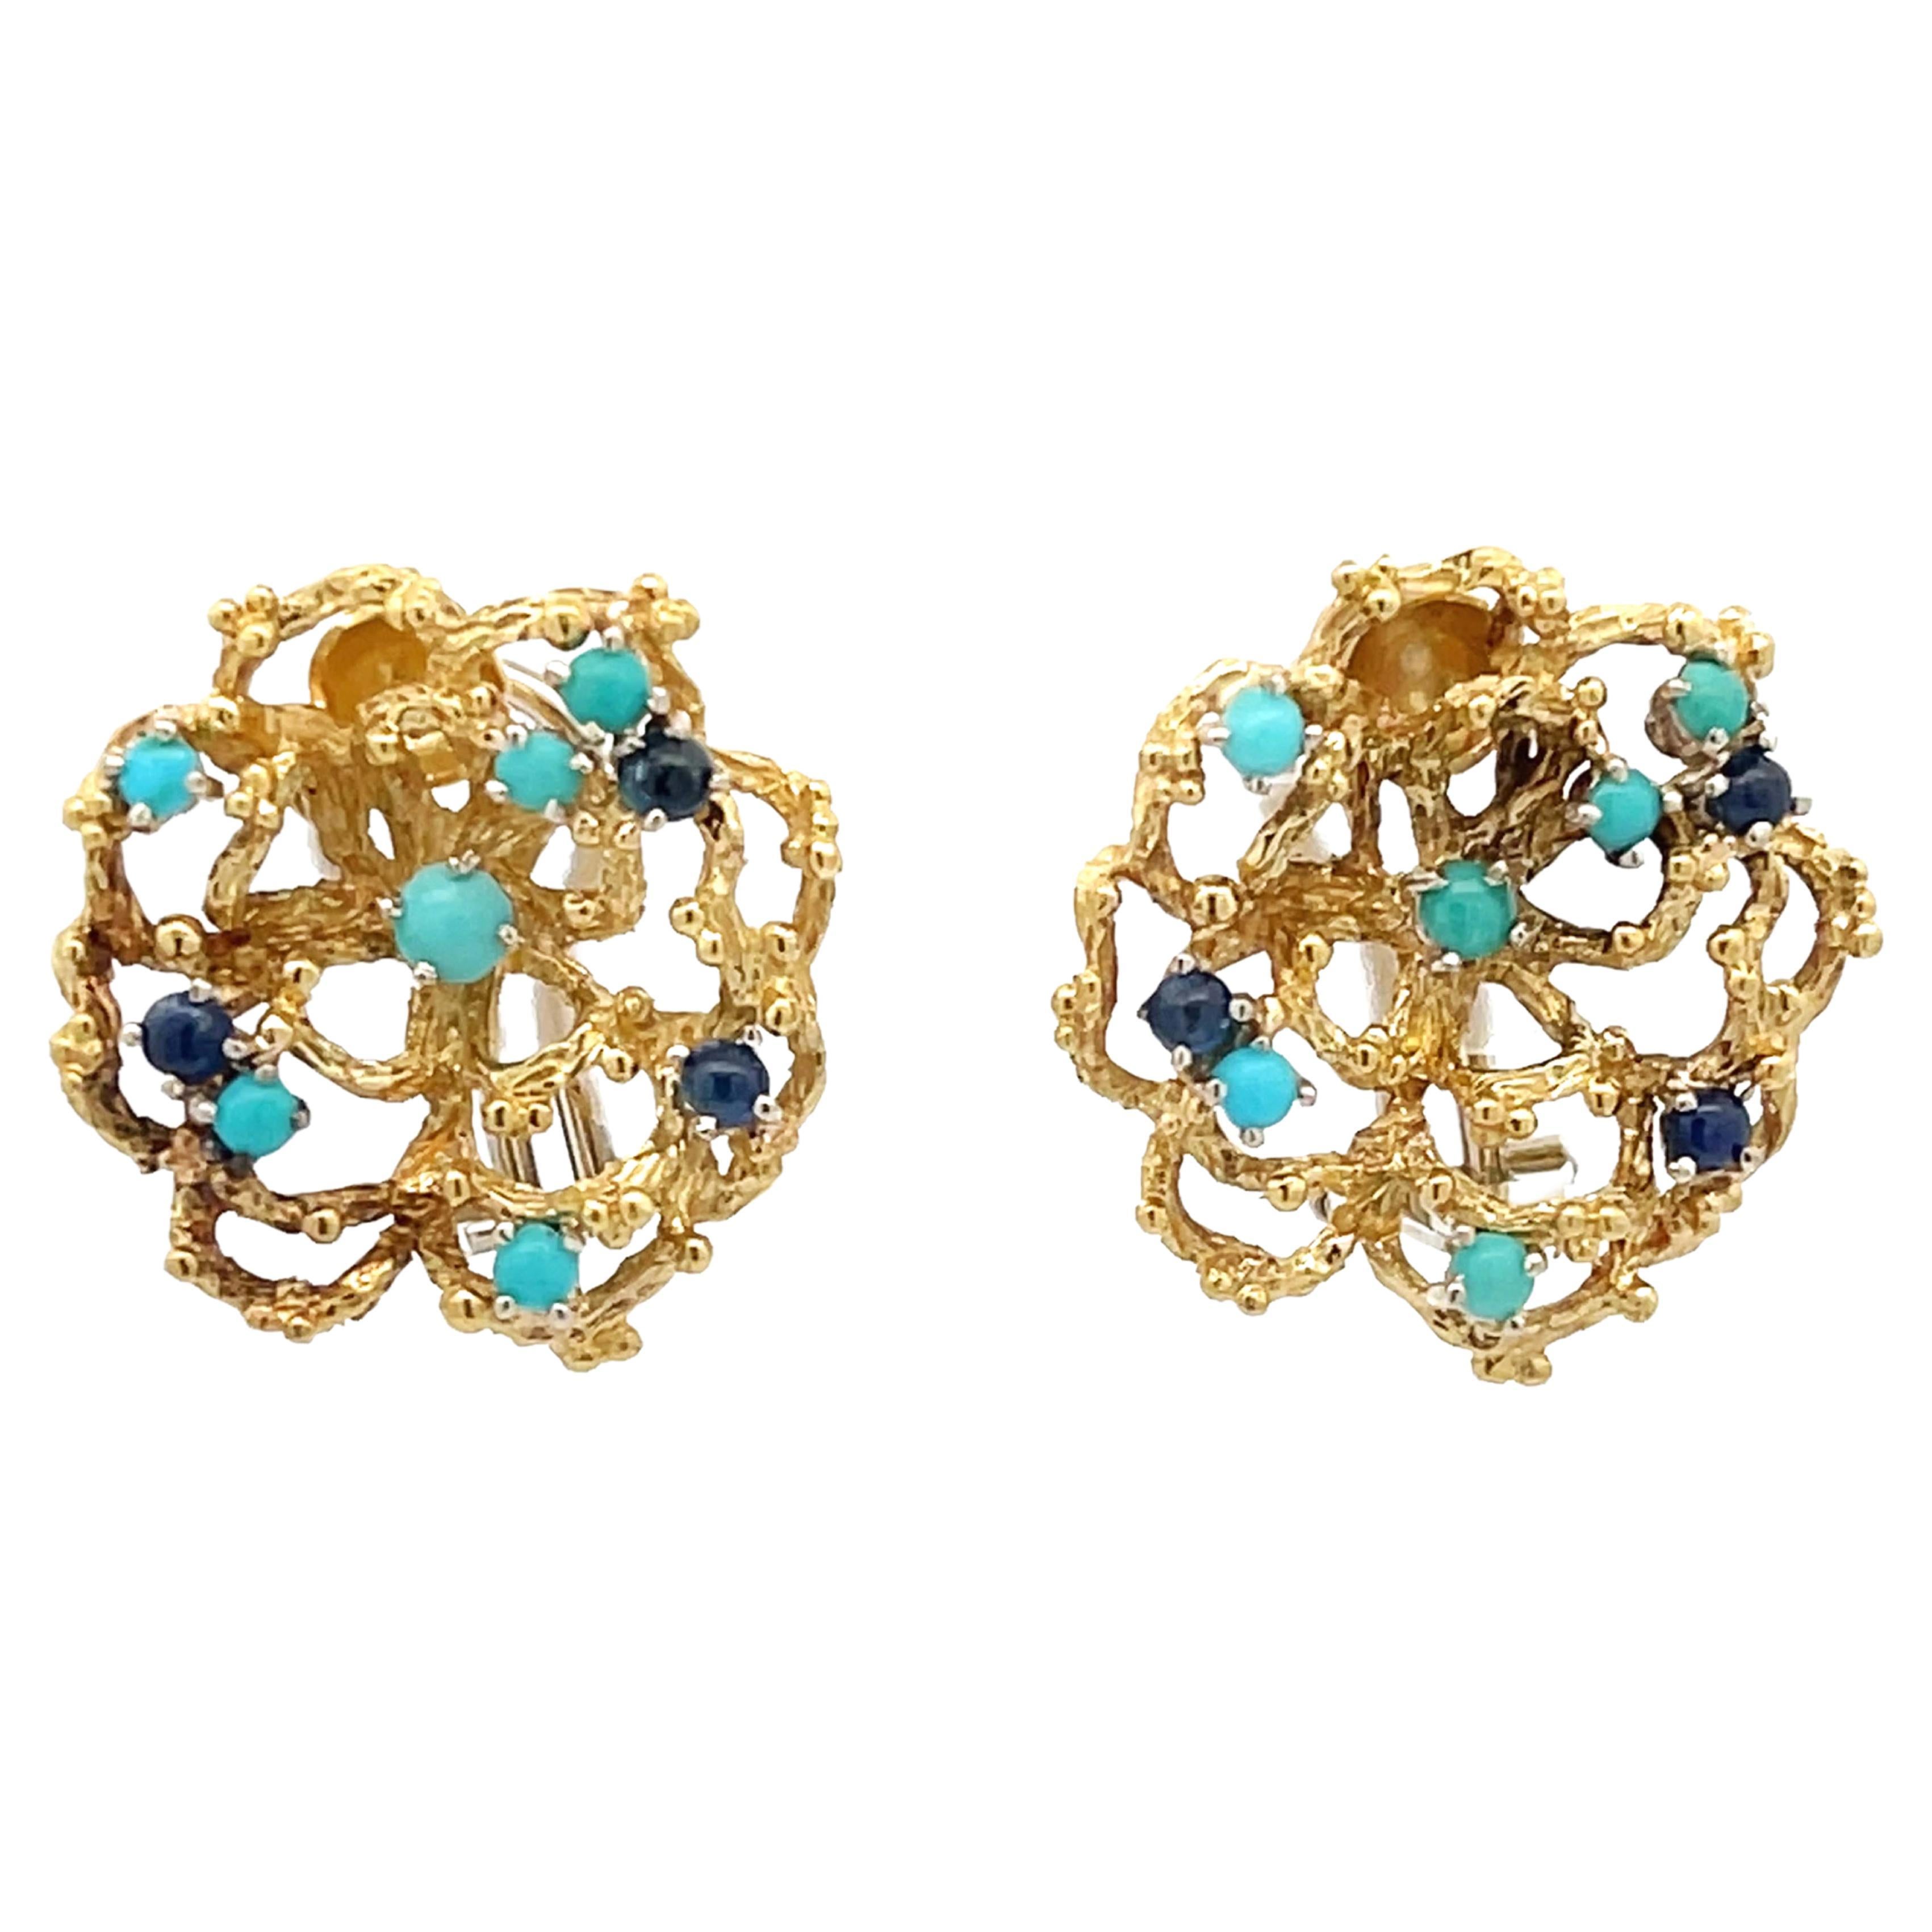 Wavy Flower Earrings with Cabochon Sapphires and Turquoises in 18k Yellow Gold For Sale